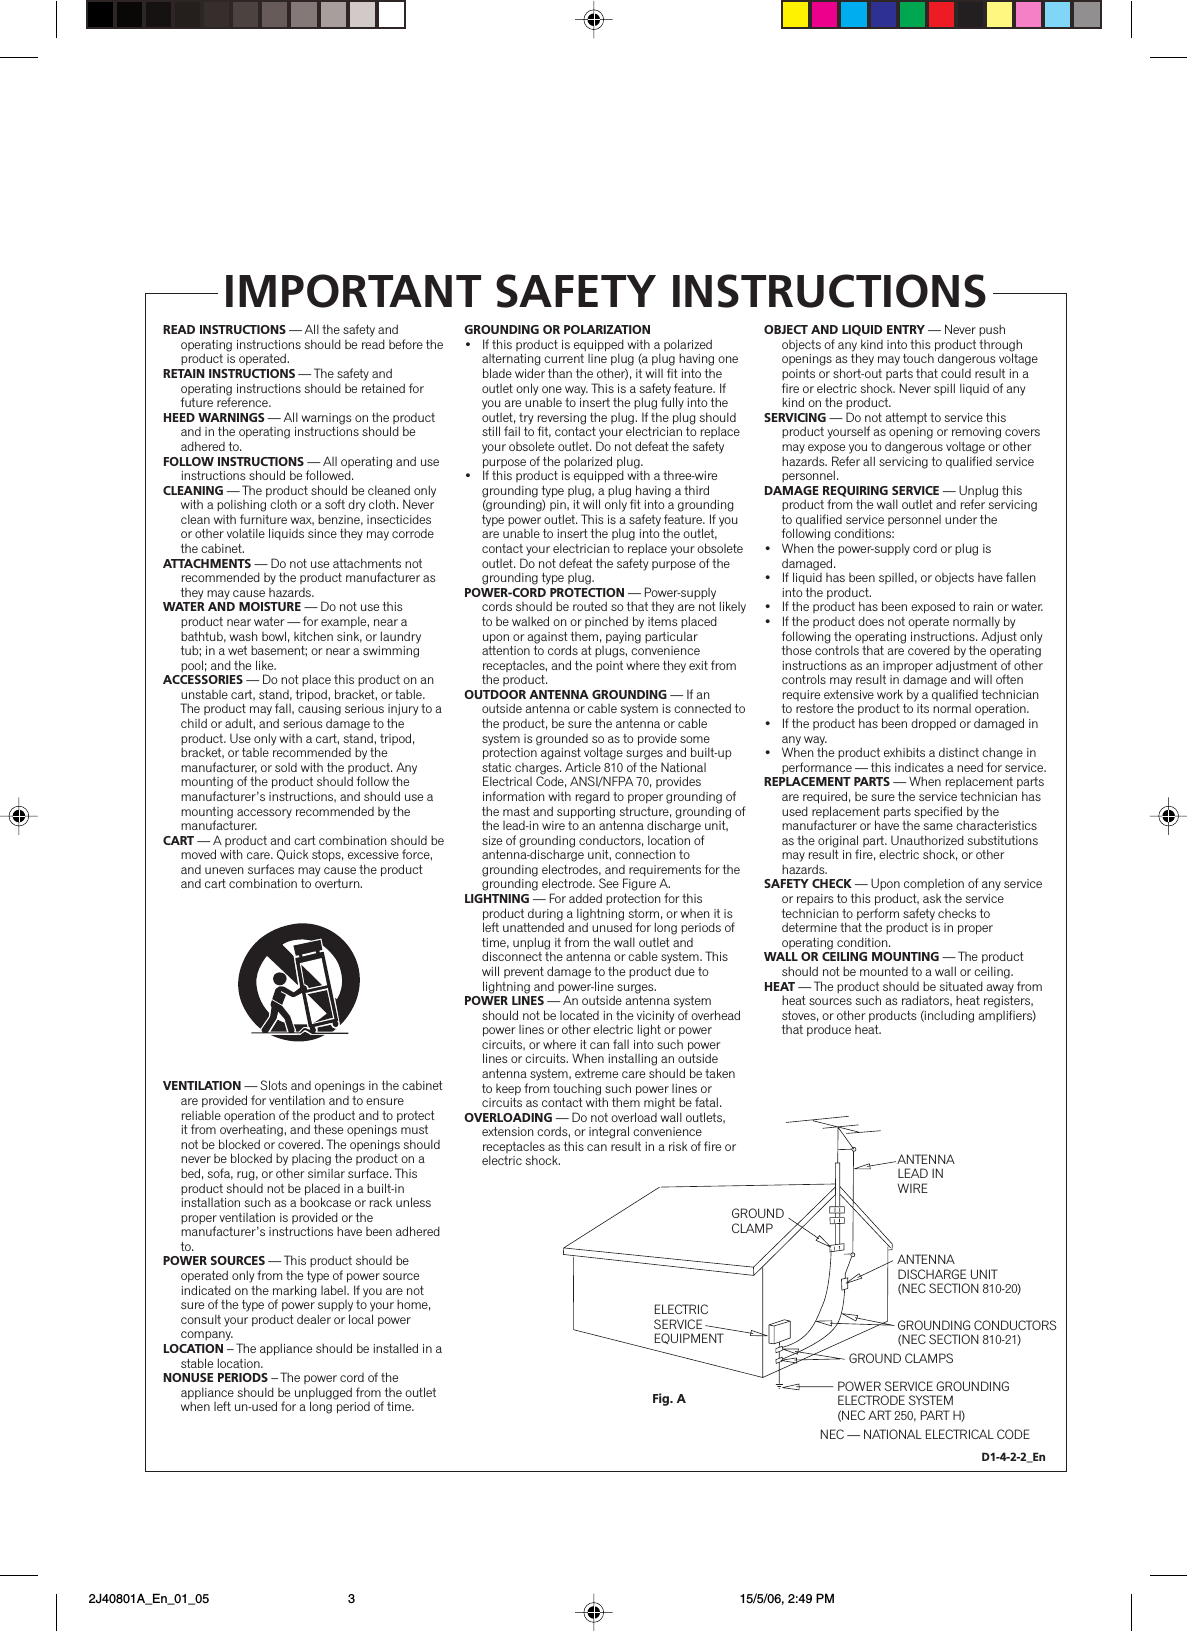 READ INSTRUCTIONS — All the safety and operating instructions should be read before the product is operated.RETAIN INSTRUCTIONS — The safety and operating instructions should be retained for future reference.HEED WARNINGS — All warnings on the product and in the operating instructions should be adhered to.FOLLOW INSTRUCTIONS — All operating and use instructions should be followed.CLEANING — The product should be cleaned only with a polishing cloth or a soft dry cloth. Never clean with furniture wax, benzine, insecticides or other volatile liquids since they may corrode the cabinet.ATTACHMENTS — Do not use attachments not recommended by the product manufacturer as they may cause hazards.WATER AND MOISTURE — Do not use this product near water — for example, near a bathtub, wash bowl, kitchen sink, or laundry tub; in a wet basement; or near a swimming pool; and the like.ACCESSORIES — Do not place this product on an unstable cart, stand, tripod, bracket, or table. The product may fall, causing serious injury to a child or adult, and serious damage to the product. Use only with a cart, stand, tripod, bracket, or table recommended by the manufacturer, or sold with the product. Any mounting of the product should follow the manufacturer’s instructions, and should use a mounting accessory recommended by the manufacturer.CART — A product and cart combination should be moved with care. Quick stops, excessive force, and uneven surfaces may cause the product and cart combination to overturn.VENTILATION — Slots and openings in the cabinet are provided for ventilation and to ensure reliable operation of the product and to protect it from overheating, and these openings must not be blocked or covered. The openings should never be blocked by placing the product on a bed, sofa, rug, or other similar surface. This product should not be placed in a built-in installation such as a bookcase or rack unless proper ventilation is provided or the manufacturer’s instructions have been adhered to.POWER SOURCES — This product should be operated only from the type of power source indicated on the marking label. If you are not sure of the type of power supply to your home, consult your product dealer or local power company.LOCATION – The appliance should be installed in a stable location.NONUSE PERIODS – The power cord of the appliance should be unplugged from the outlet when left un-used for a long period of time.GROUNDING OR POLARIZATION•  If this product is equipped with a polarized alternating current line plug (a plug having one blade wider than the other), it will fit into the outlet only one way. This is a safety feature. If you are unable to insert the plug fully into the outlet, try reversing the plug. If the plug should still fail to fit, contact your electrician to replace your obsolete outlet. Do not defeat the safety purpose of the polarized plug.•  If this product is equipped with a three-wire grounding type plug, a plug having a third (grounding) pin, it will only fit into a grounding type power outlet. This is a safety feature. If you are unable to insert the plug into the outlet, contact your electrician to replace your obsolete outlet. Do not defeat the safety purpose of the grounding type plug.POWER-CORD PROTECTION — Power-supply cords should be routed so that they are not likely to be walked on or pinched by items placed upon or against them, paying particular attention to cords at plugs, convenience receptacles, and the point where they exit from the product.OUTDOOR ANTENNA GROUNDING — If an outside antenna or cable system is connected to the product, be sure the antenna or cable system is grounded so as to provide some protection against voltage surges and built-up static charges. Article 810 of the National Electrical Code, ANSI/NFPA 70, provides information with regard to proper grounding of the mast and supporting structure, grounding of the lead-in wire to an antenna discharge unit, size of grounding conductors, location of antenna-discharge unit, connection to grounding electrodes, and requirements for the grounding electrode. See Figure A.LIGHTNING — For added protection for this product during a lightning storm, or when it is left unattended and unused for long periods of time, unplug it from the wall outlet and disconnect the antenna or cable system. This will prevent damage to the product due to lightning and power-line surges.POWER LINES — An outside antenna system should not be located in the vicinity of overhead power lines or other electric light or power circuits, or where it can fall into such power lines or circuits. When installing an outside antenna system, extreme care should be taken to keep from touching such power lines or circuits as contact with them might be fatal.OVERLOADING — Do not overload wall outlets, extension cords, or integral convenience receptacles as this can result in a risk of fire or electric shock.OBJECT AND LIQUID ENTRY — Never push objects of any kind into this product through openings as they may touch dangerous voltage points or short-out parts that could result in a fire or electric shock. Never spill liquid of any kind on the product.SERVICING — Do not attempt to service this product yourself as opening or removing covers may expose you to dangerous voltage or other hazards. Refer all servicing to qualified service personnel.DAMAGE REQUIRING SERVICE — Unplug this product from the wall outlet and refer servicing to qualified service personnel under the following conditions:•  When the power-supply cord or plug is damaged.•  If liquid has been spilled, or objects have fallen into the product.•  If the product has been exposed to rain or water.•  If the product does not operate normally by following the operating instructions. Adjust only those controls that are covered by the operating instructions as an improper adjustment of other controls may result in damage and will often require extensive work by a qualified technician to restore the product to its normal operation.•  If the product has been dropped or damaged in any way.•  When the product exhibits a distinct change in performance — this indicates a need for service.REPLACEMENT PARTS — When replacement parts are required, be sure the service technician has used replacement parts specified by the manufacturer or have the same characteristics as the original part. Unauthorized substitutions may result in fire, electric shock, or other hazards.SAFETY CHECK — Upon completion of any service or repairs to this product, ask the service technician to perform safety checks to determine that the product is in proper operating condition.WALL OR CEILING MOUNTING — The product should not be mounted to a wall or ceiling.HEAT — The product should be situated away from heat sources such as radiators, heat registers, stoves, or other products (including amplifiers) that produce heat.GROUNDCLAMPELECTRICSERVICEEQUIPMENTANTENNALEAD IN WIREANTENNADISCHARGE UNIT(NEC SECTION 810-20)GROUNDING CONDUCTORS(NEC SECTION 810-21)GROUND CLAMPSPOWER SERVICE GROUNDINGELECTRODE SYSTEM(NEC ART 250, PART H)NEC — NATIONAL ELECTRICAL CODEFig. AIMPORTANT SAFETY INSTRUCTIONSD1-4-2-2_En 2J40801A_En_01_05 15/5/06, 2:49 PM3